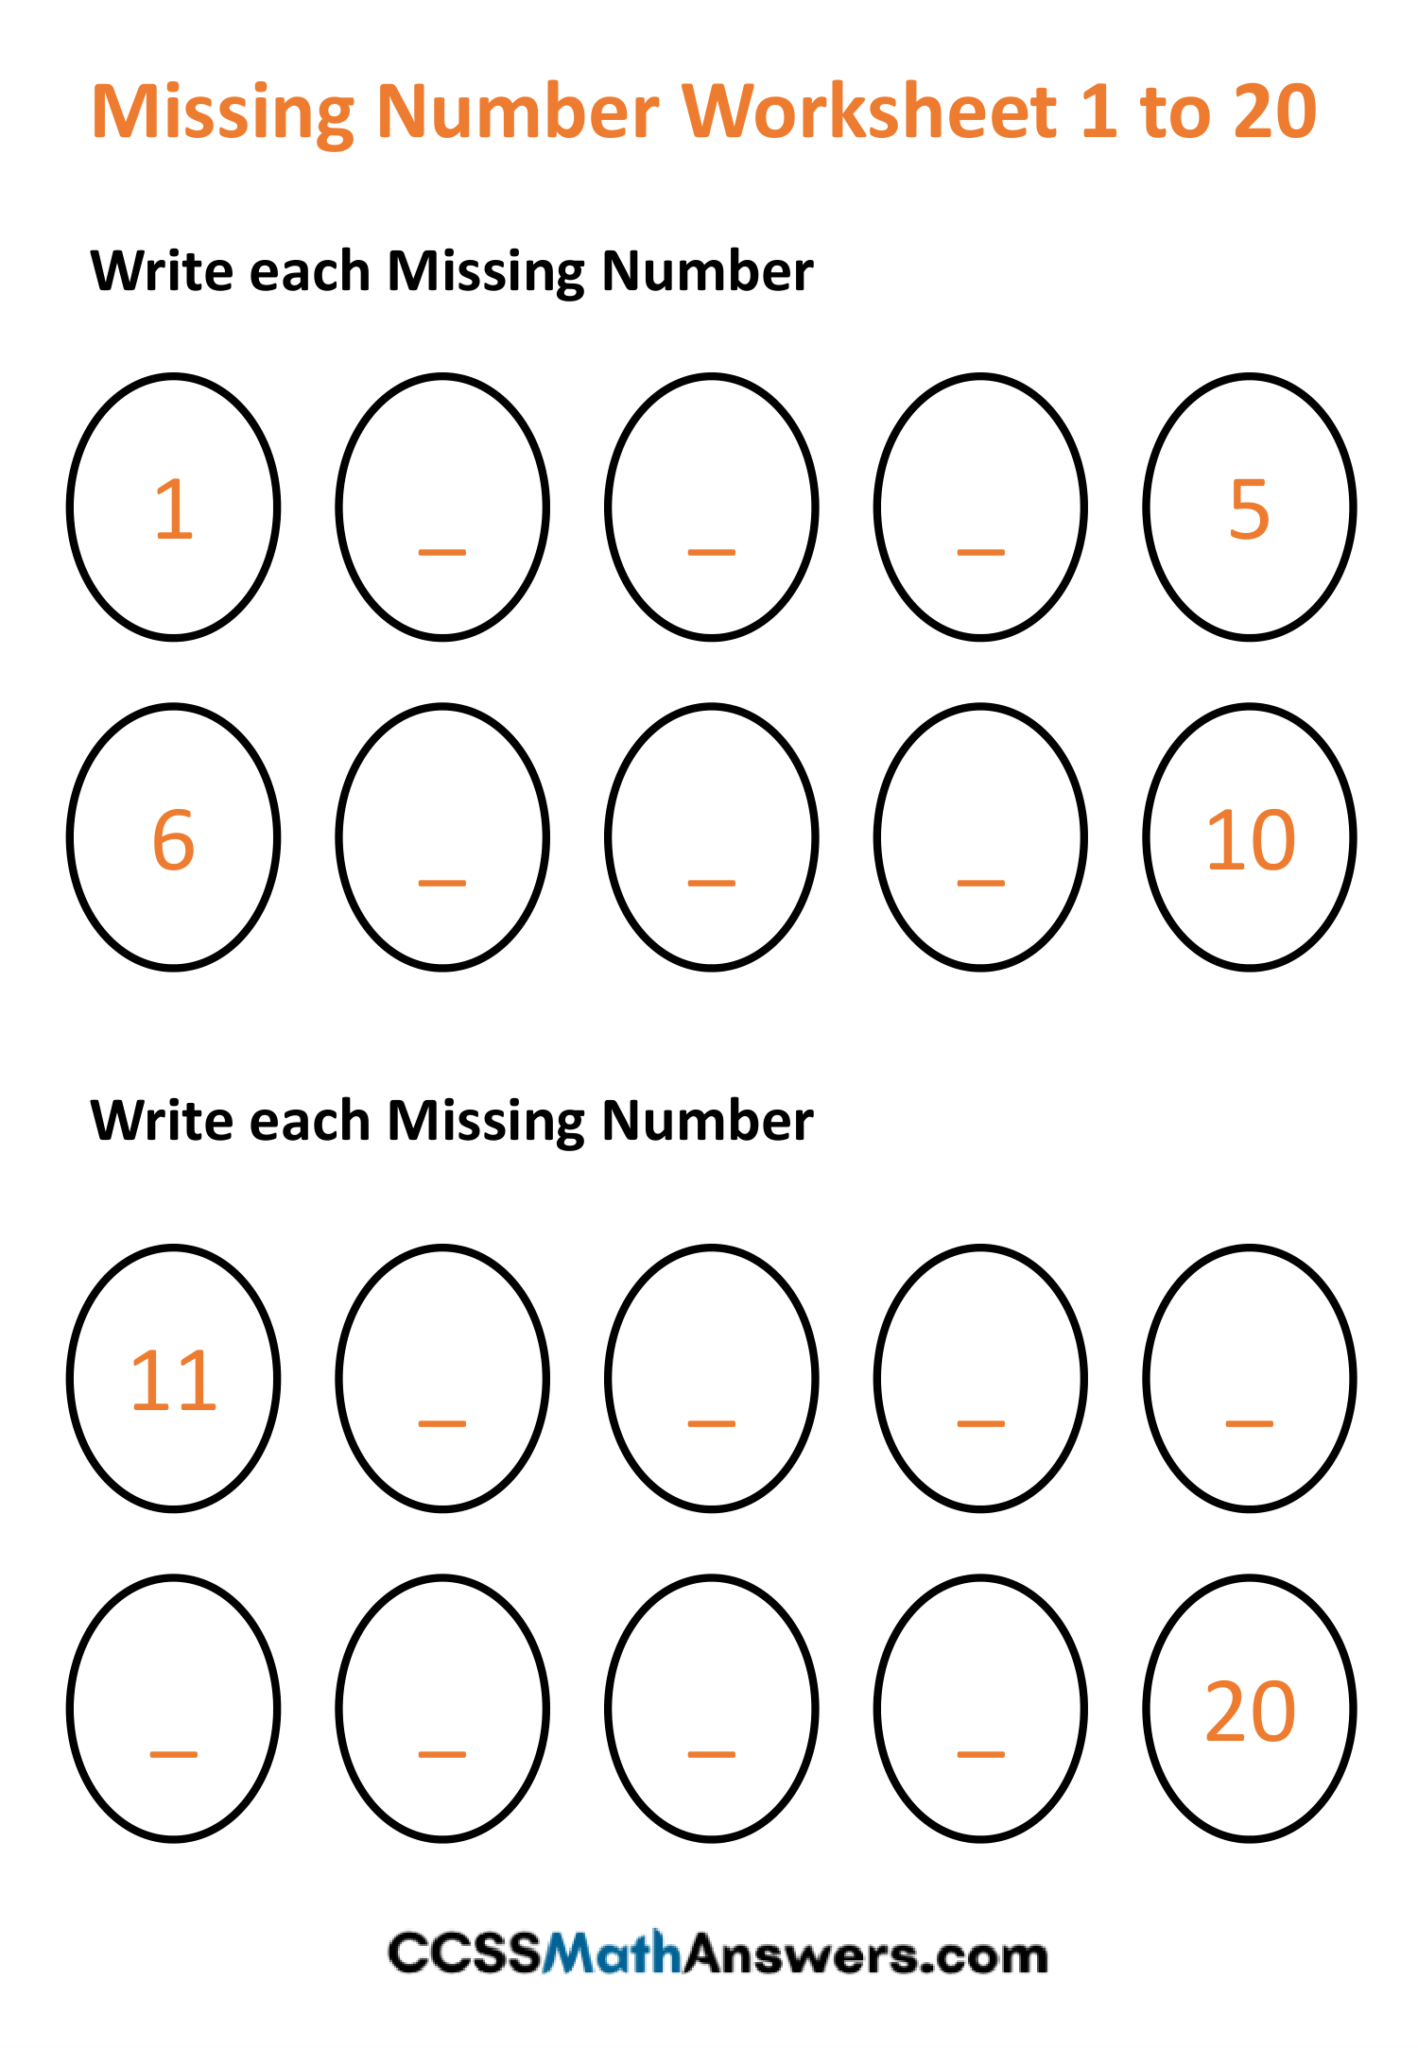 missing-number-worksheet-1-to-20-ccss-math-answers